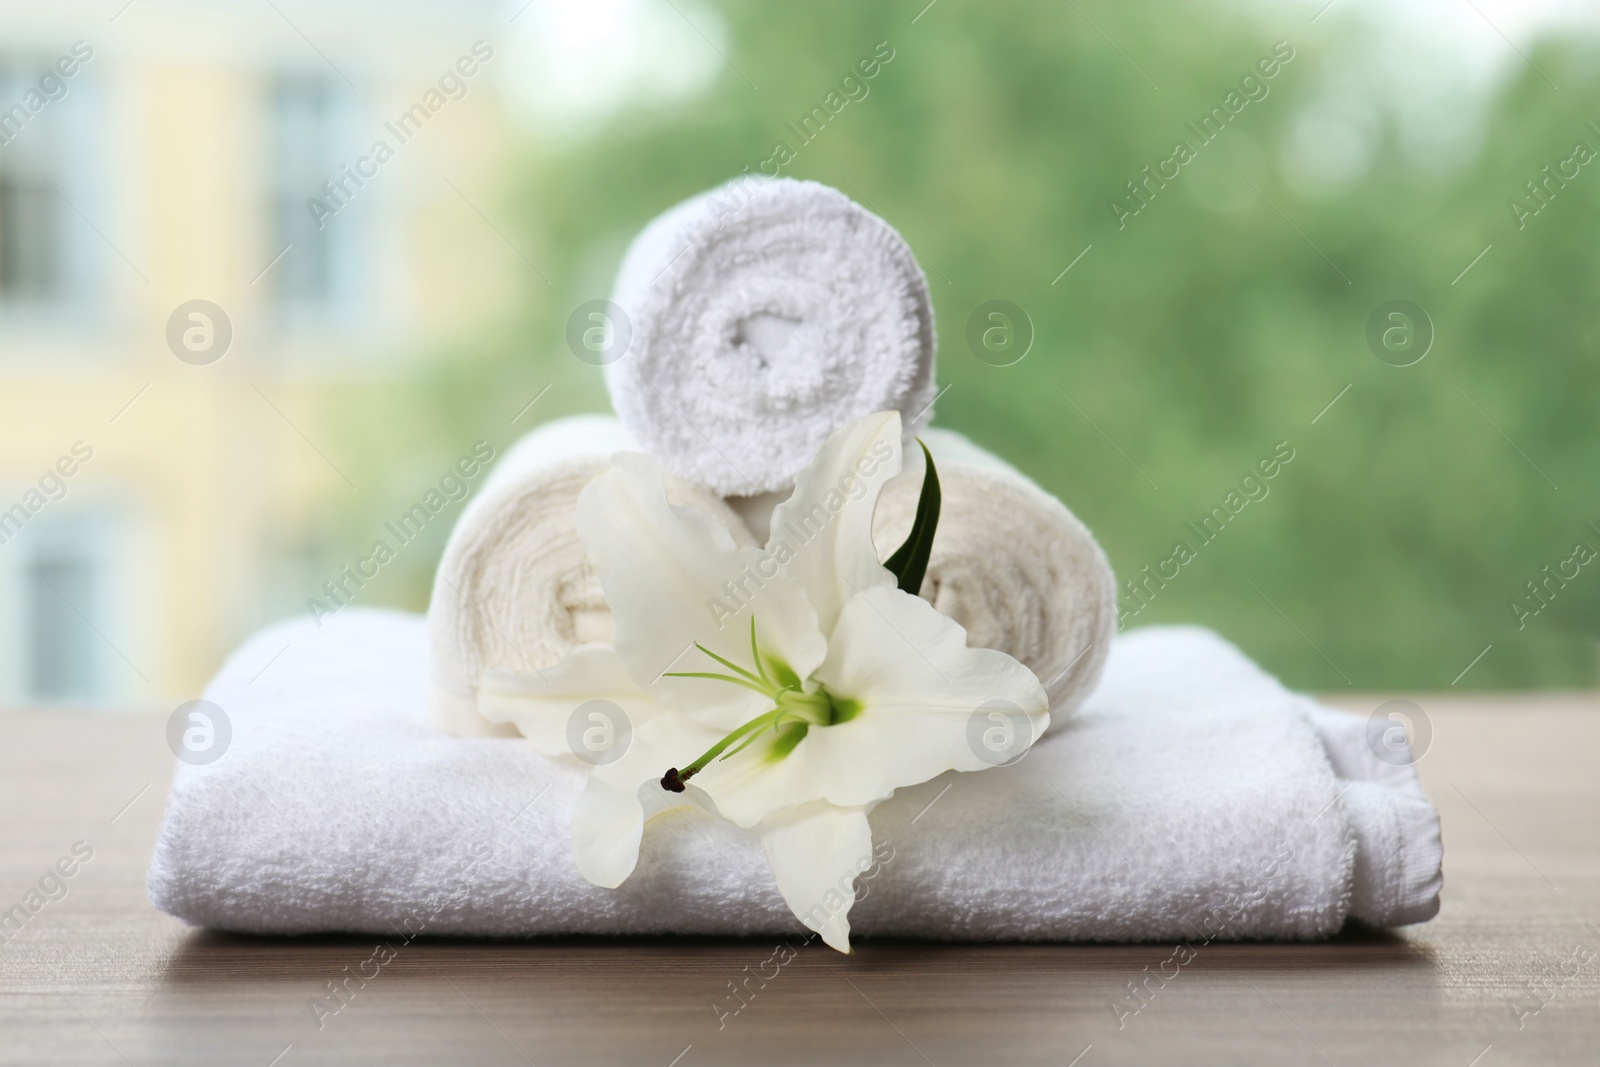 Photo of Pile of fresh towels and flower on table against blurred background